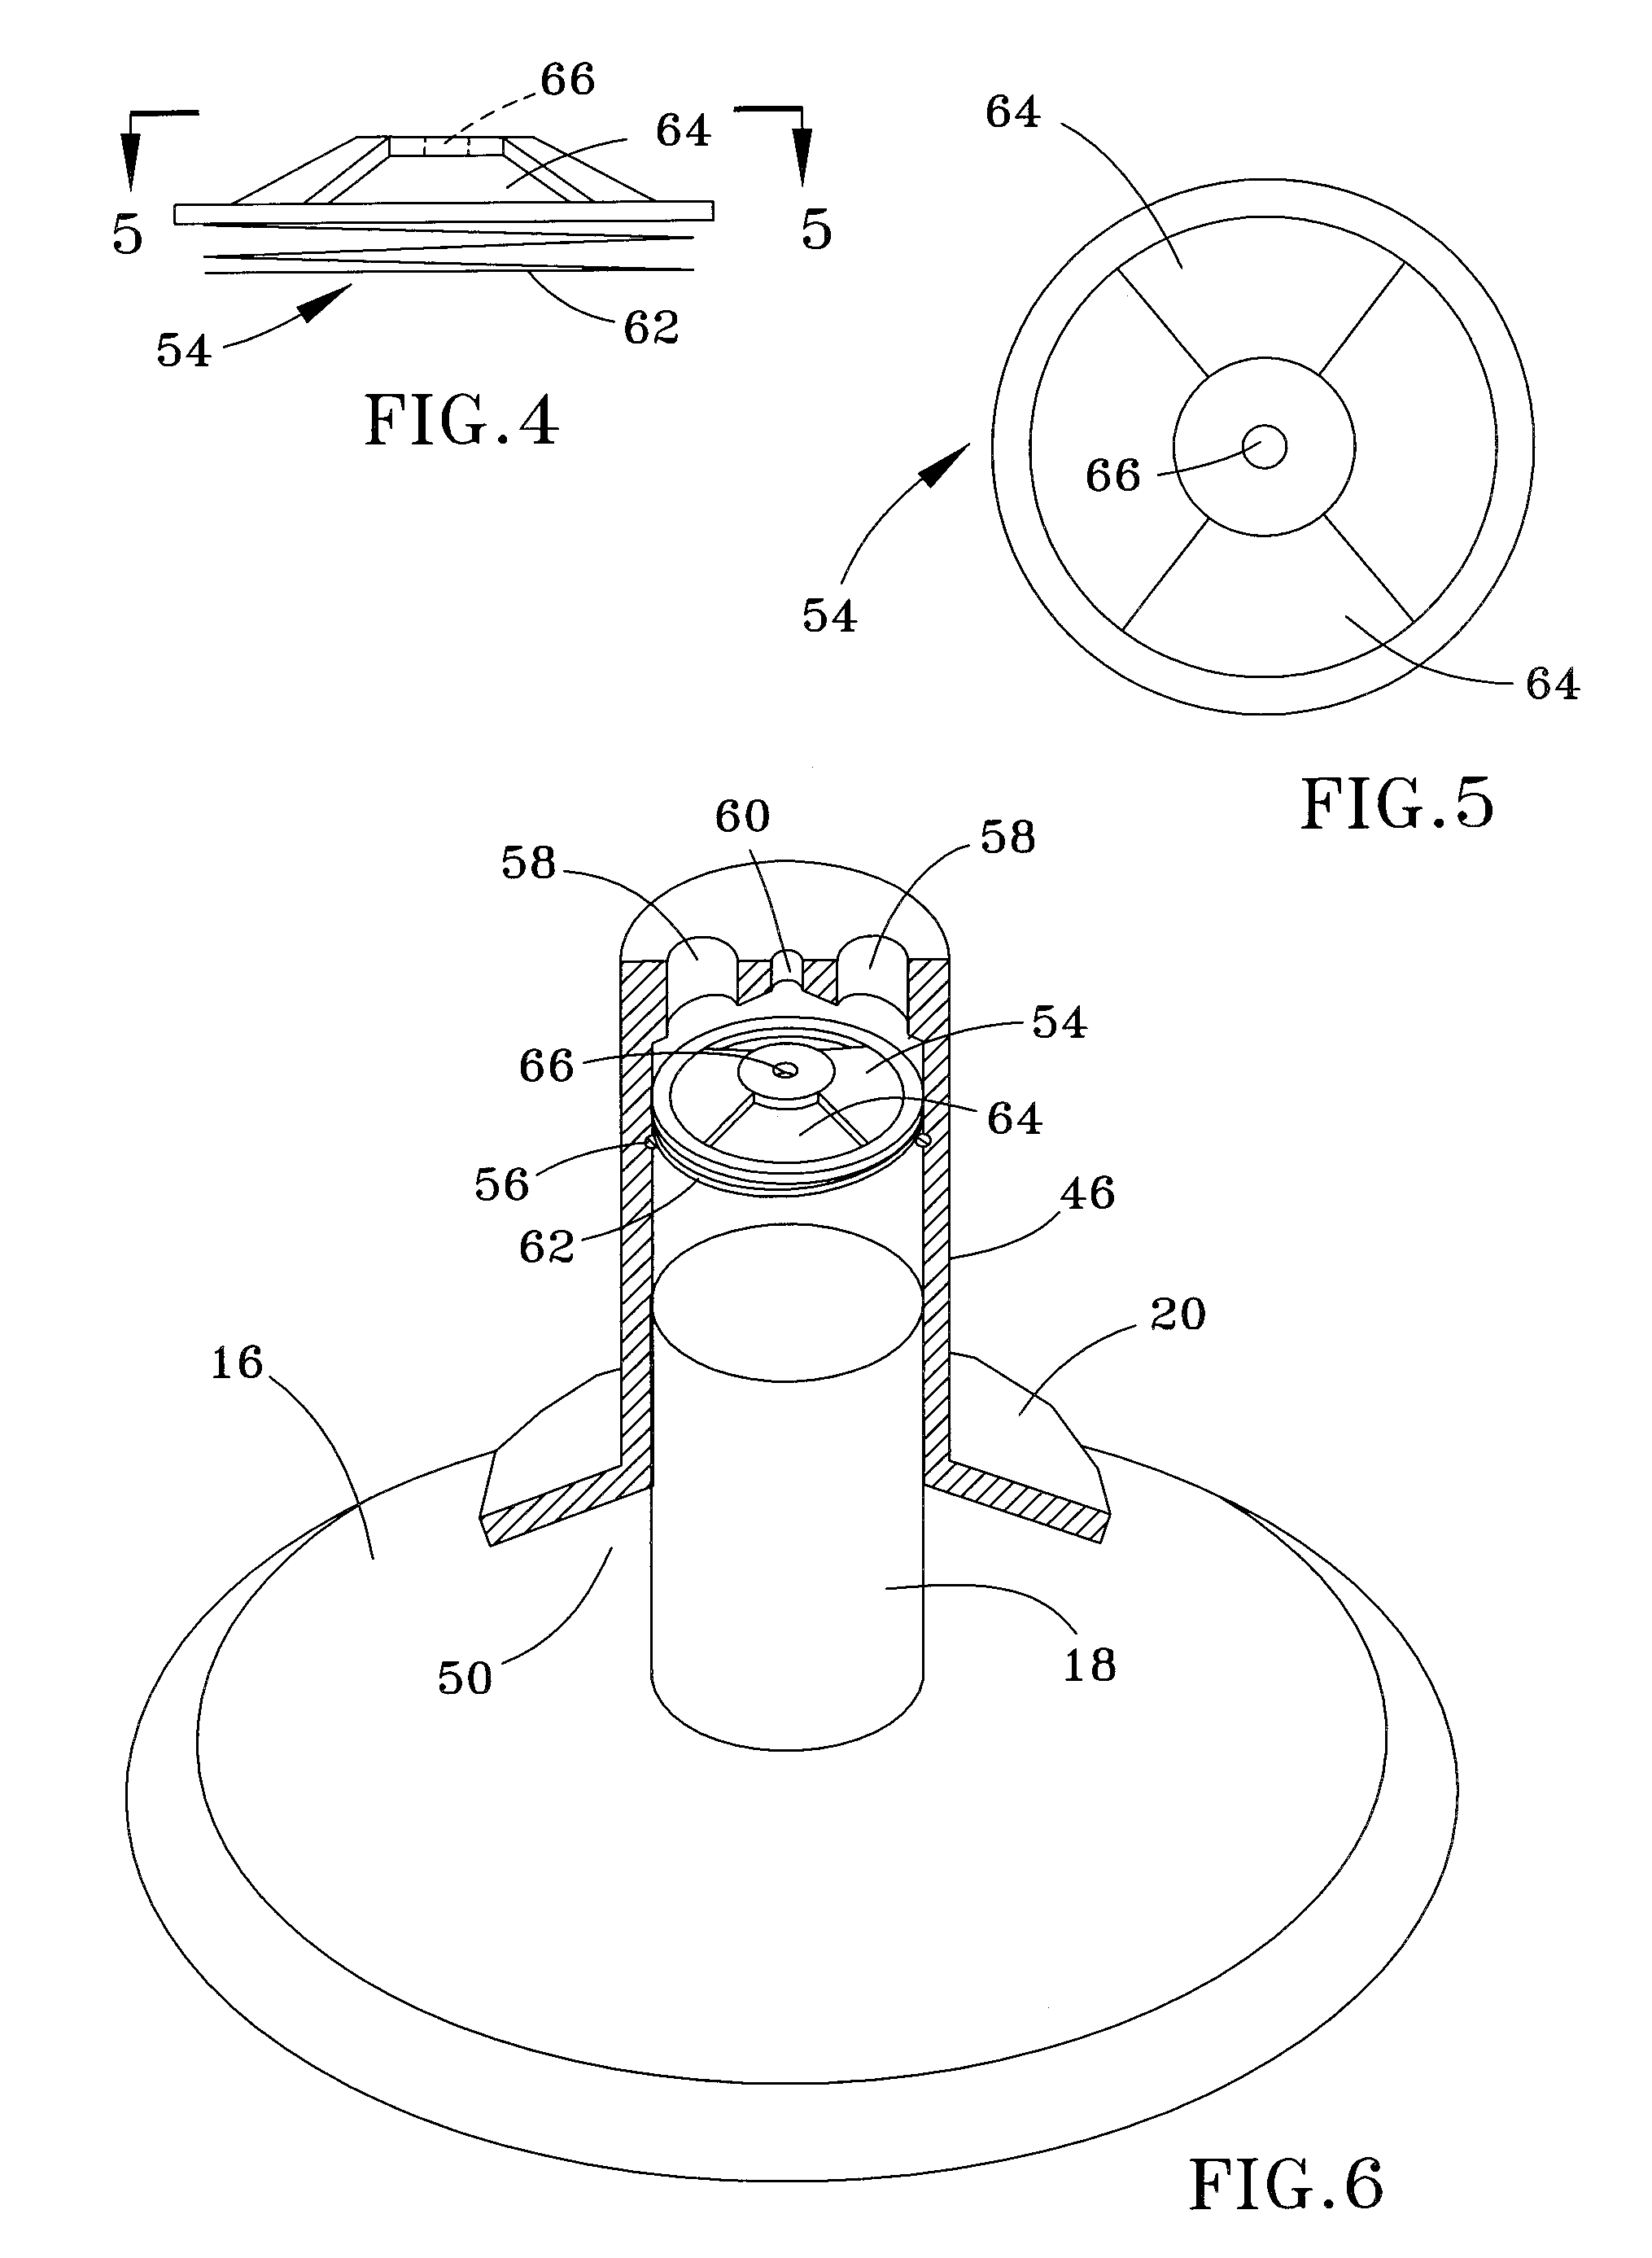 Vacuum relief unit and method for a pool